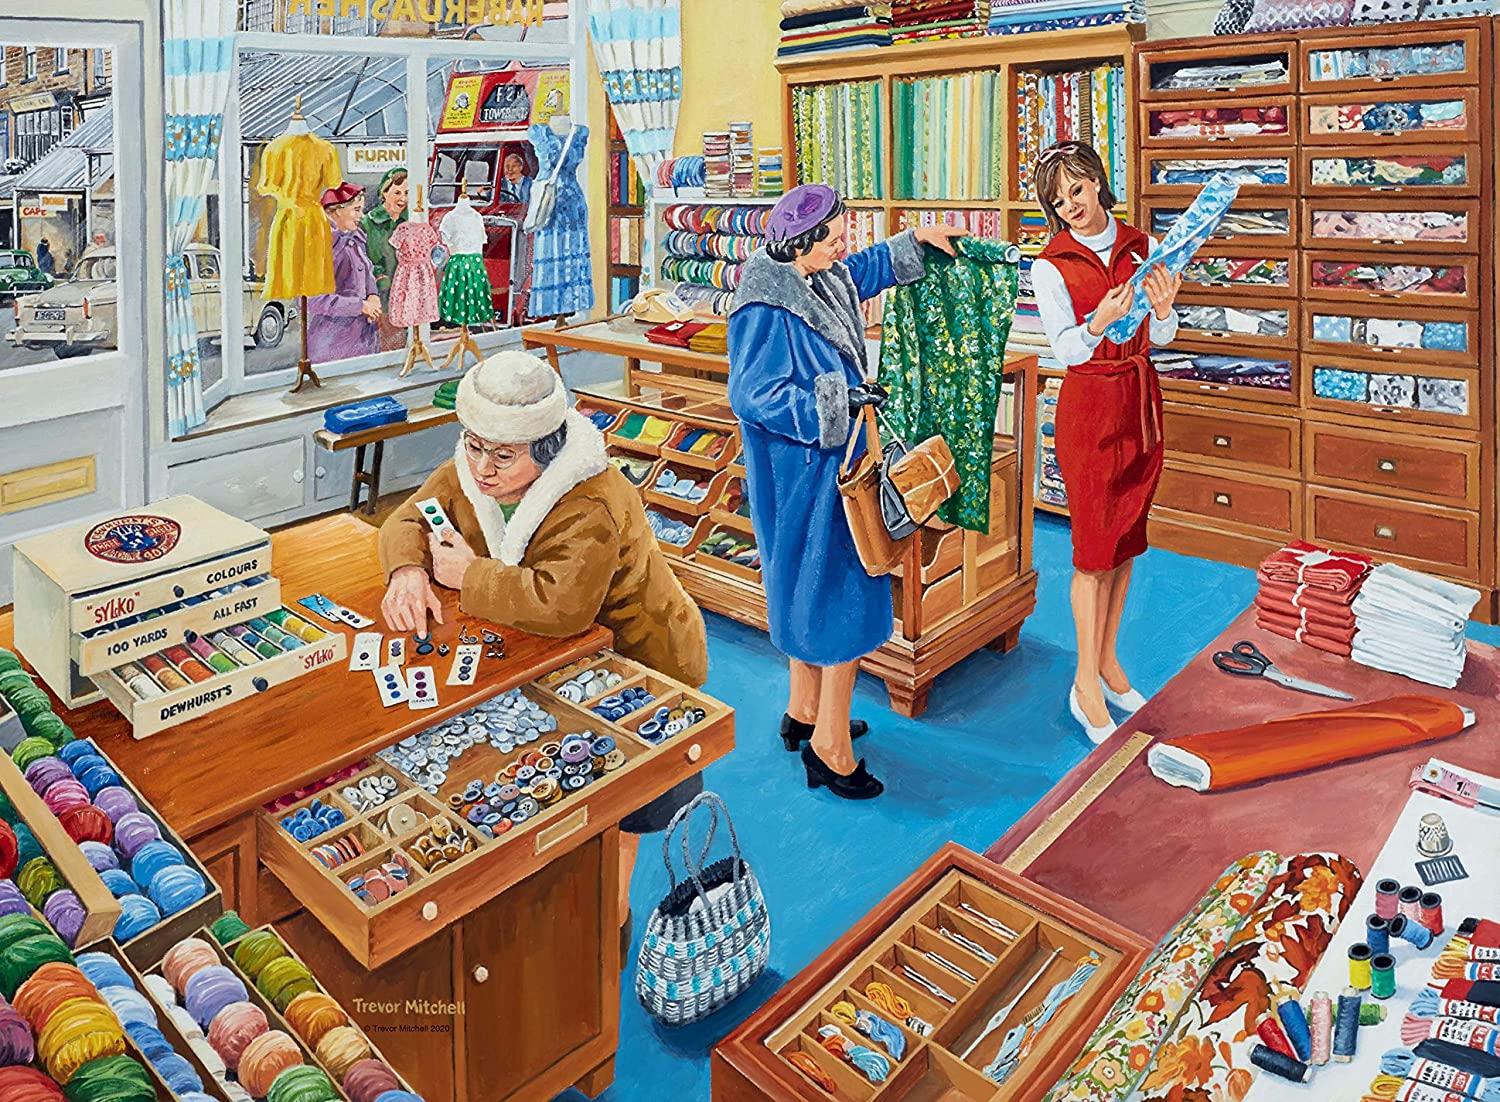 Ravensburger Happy Days at Work, The Haberdasher Jigsaw Puzzle (500 Pieces)